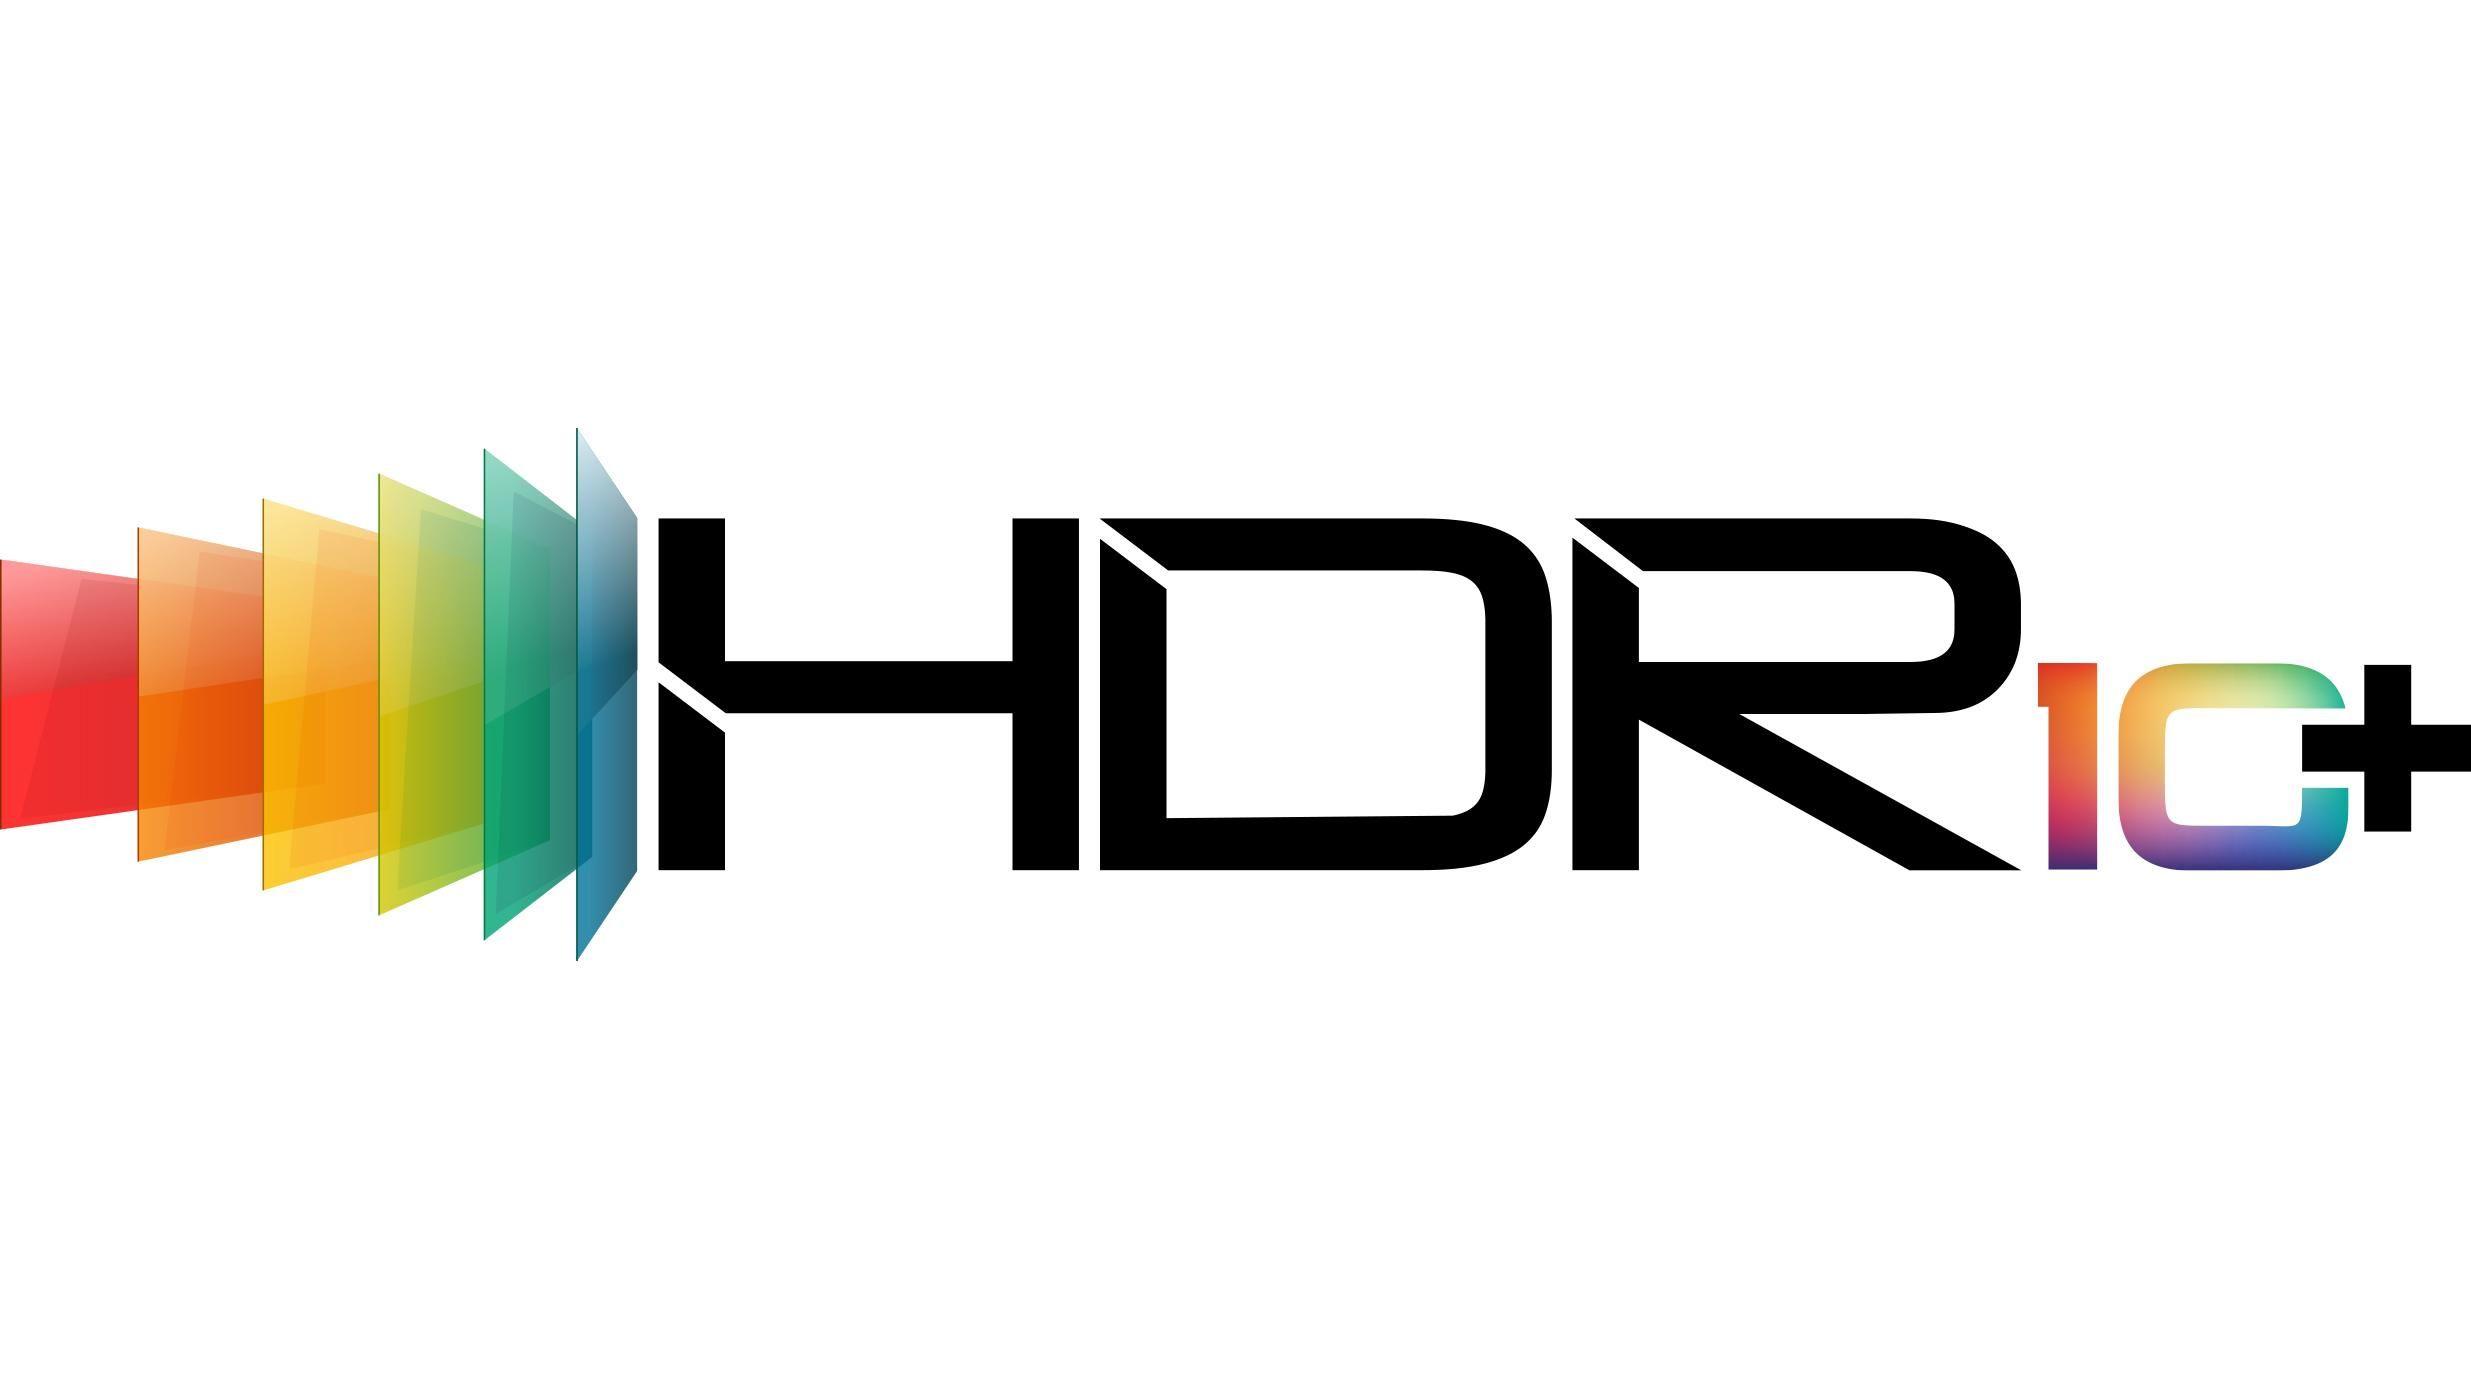 HDR Logo - HDR10+ Technologies, LLC, founded by 20th Century Fox, Panasonic and ...